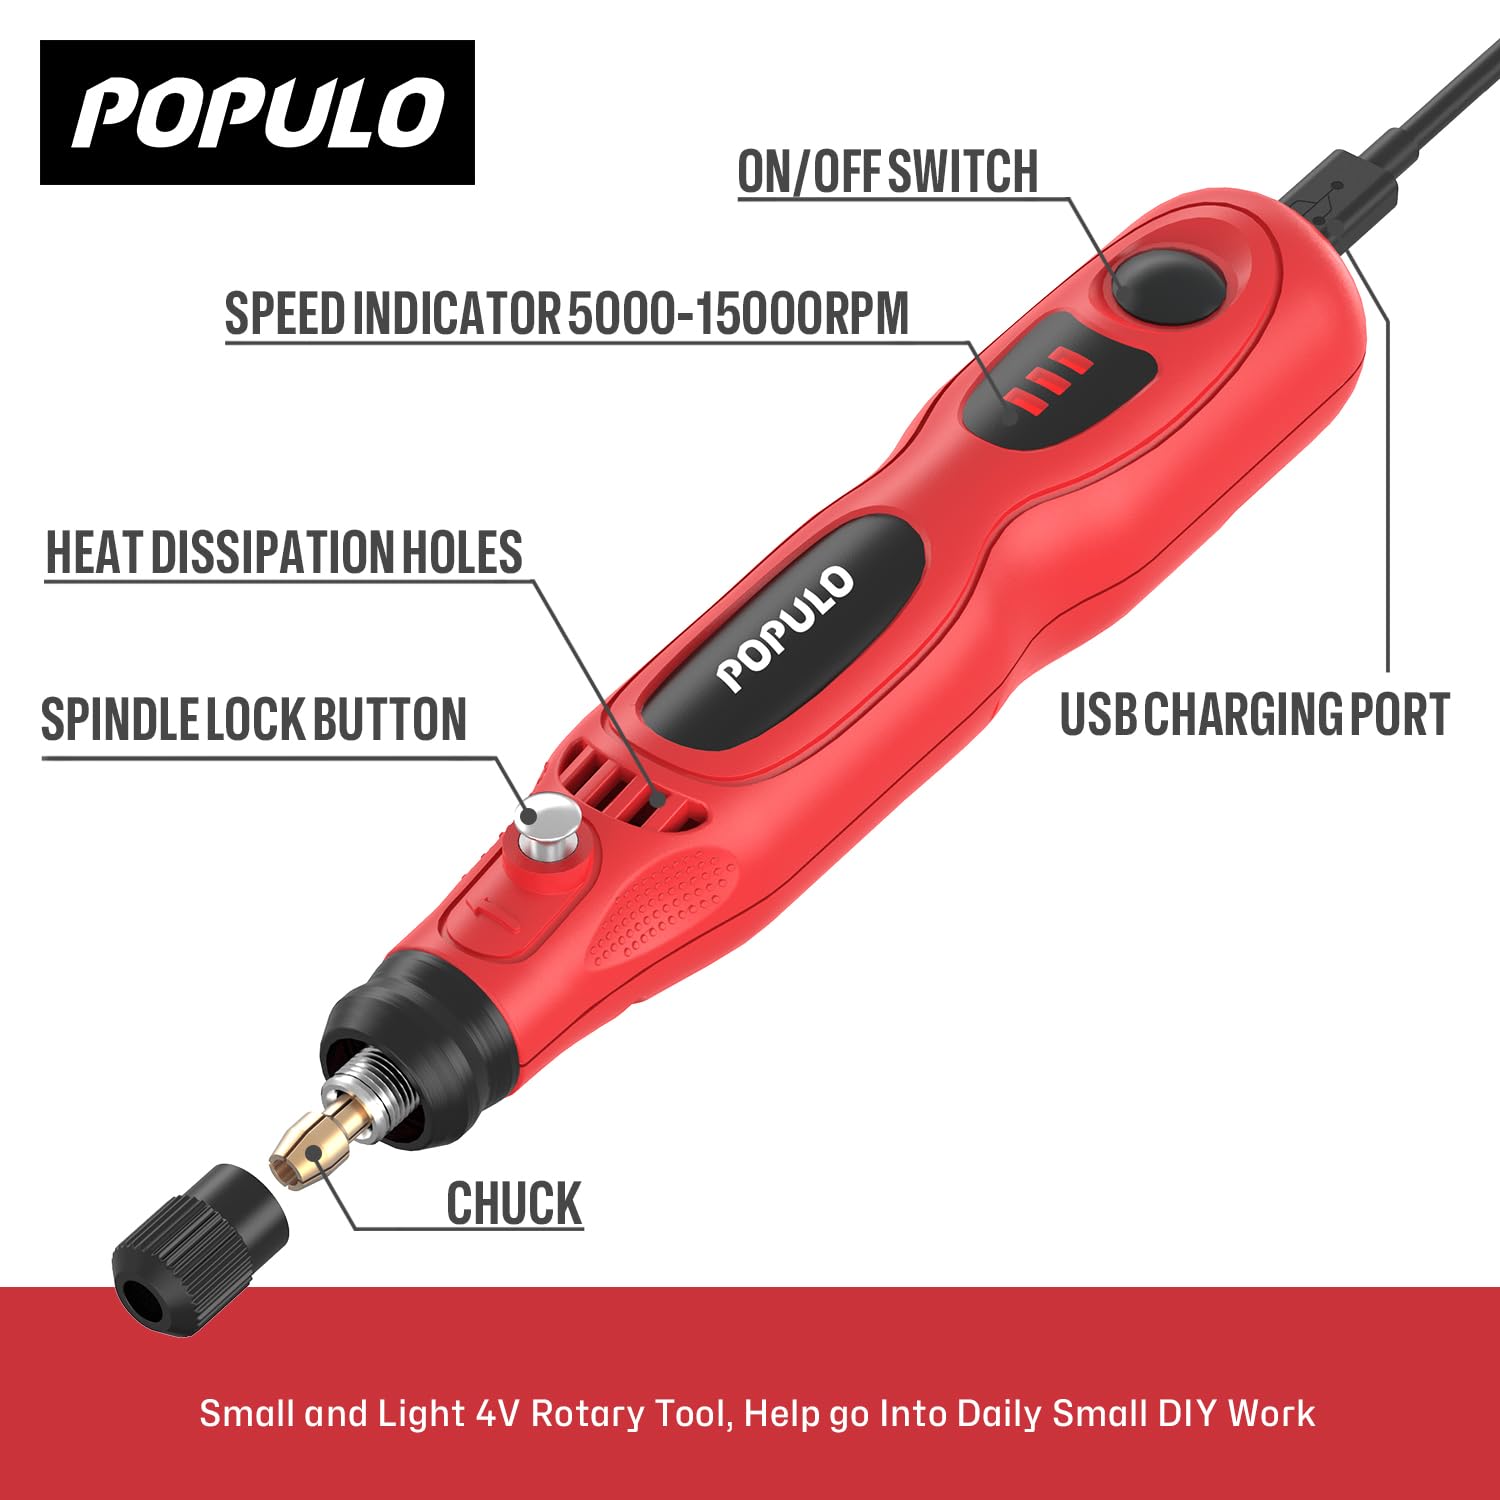 POPULO Mini Cordless Rotary Tool Portable 4V Jewelry Polishing Kit with 46 Pieces Rotary Accessory Kit, Max Speed Load up to15000 RPM,USB Charging,Engraving Pen,Polishing, Grinding, DIY Crafts